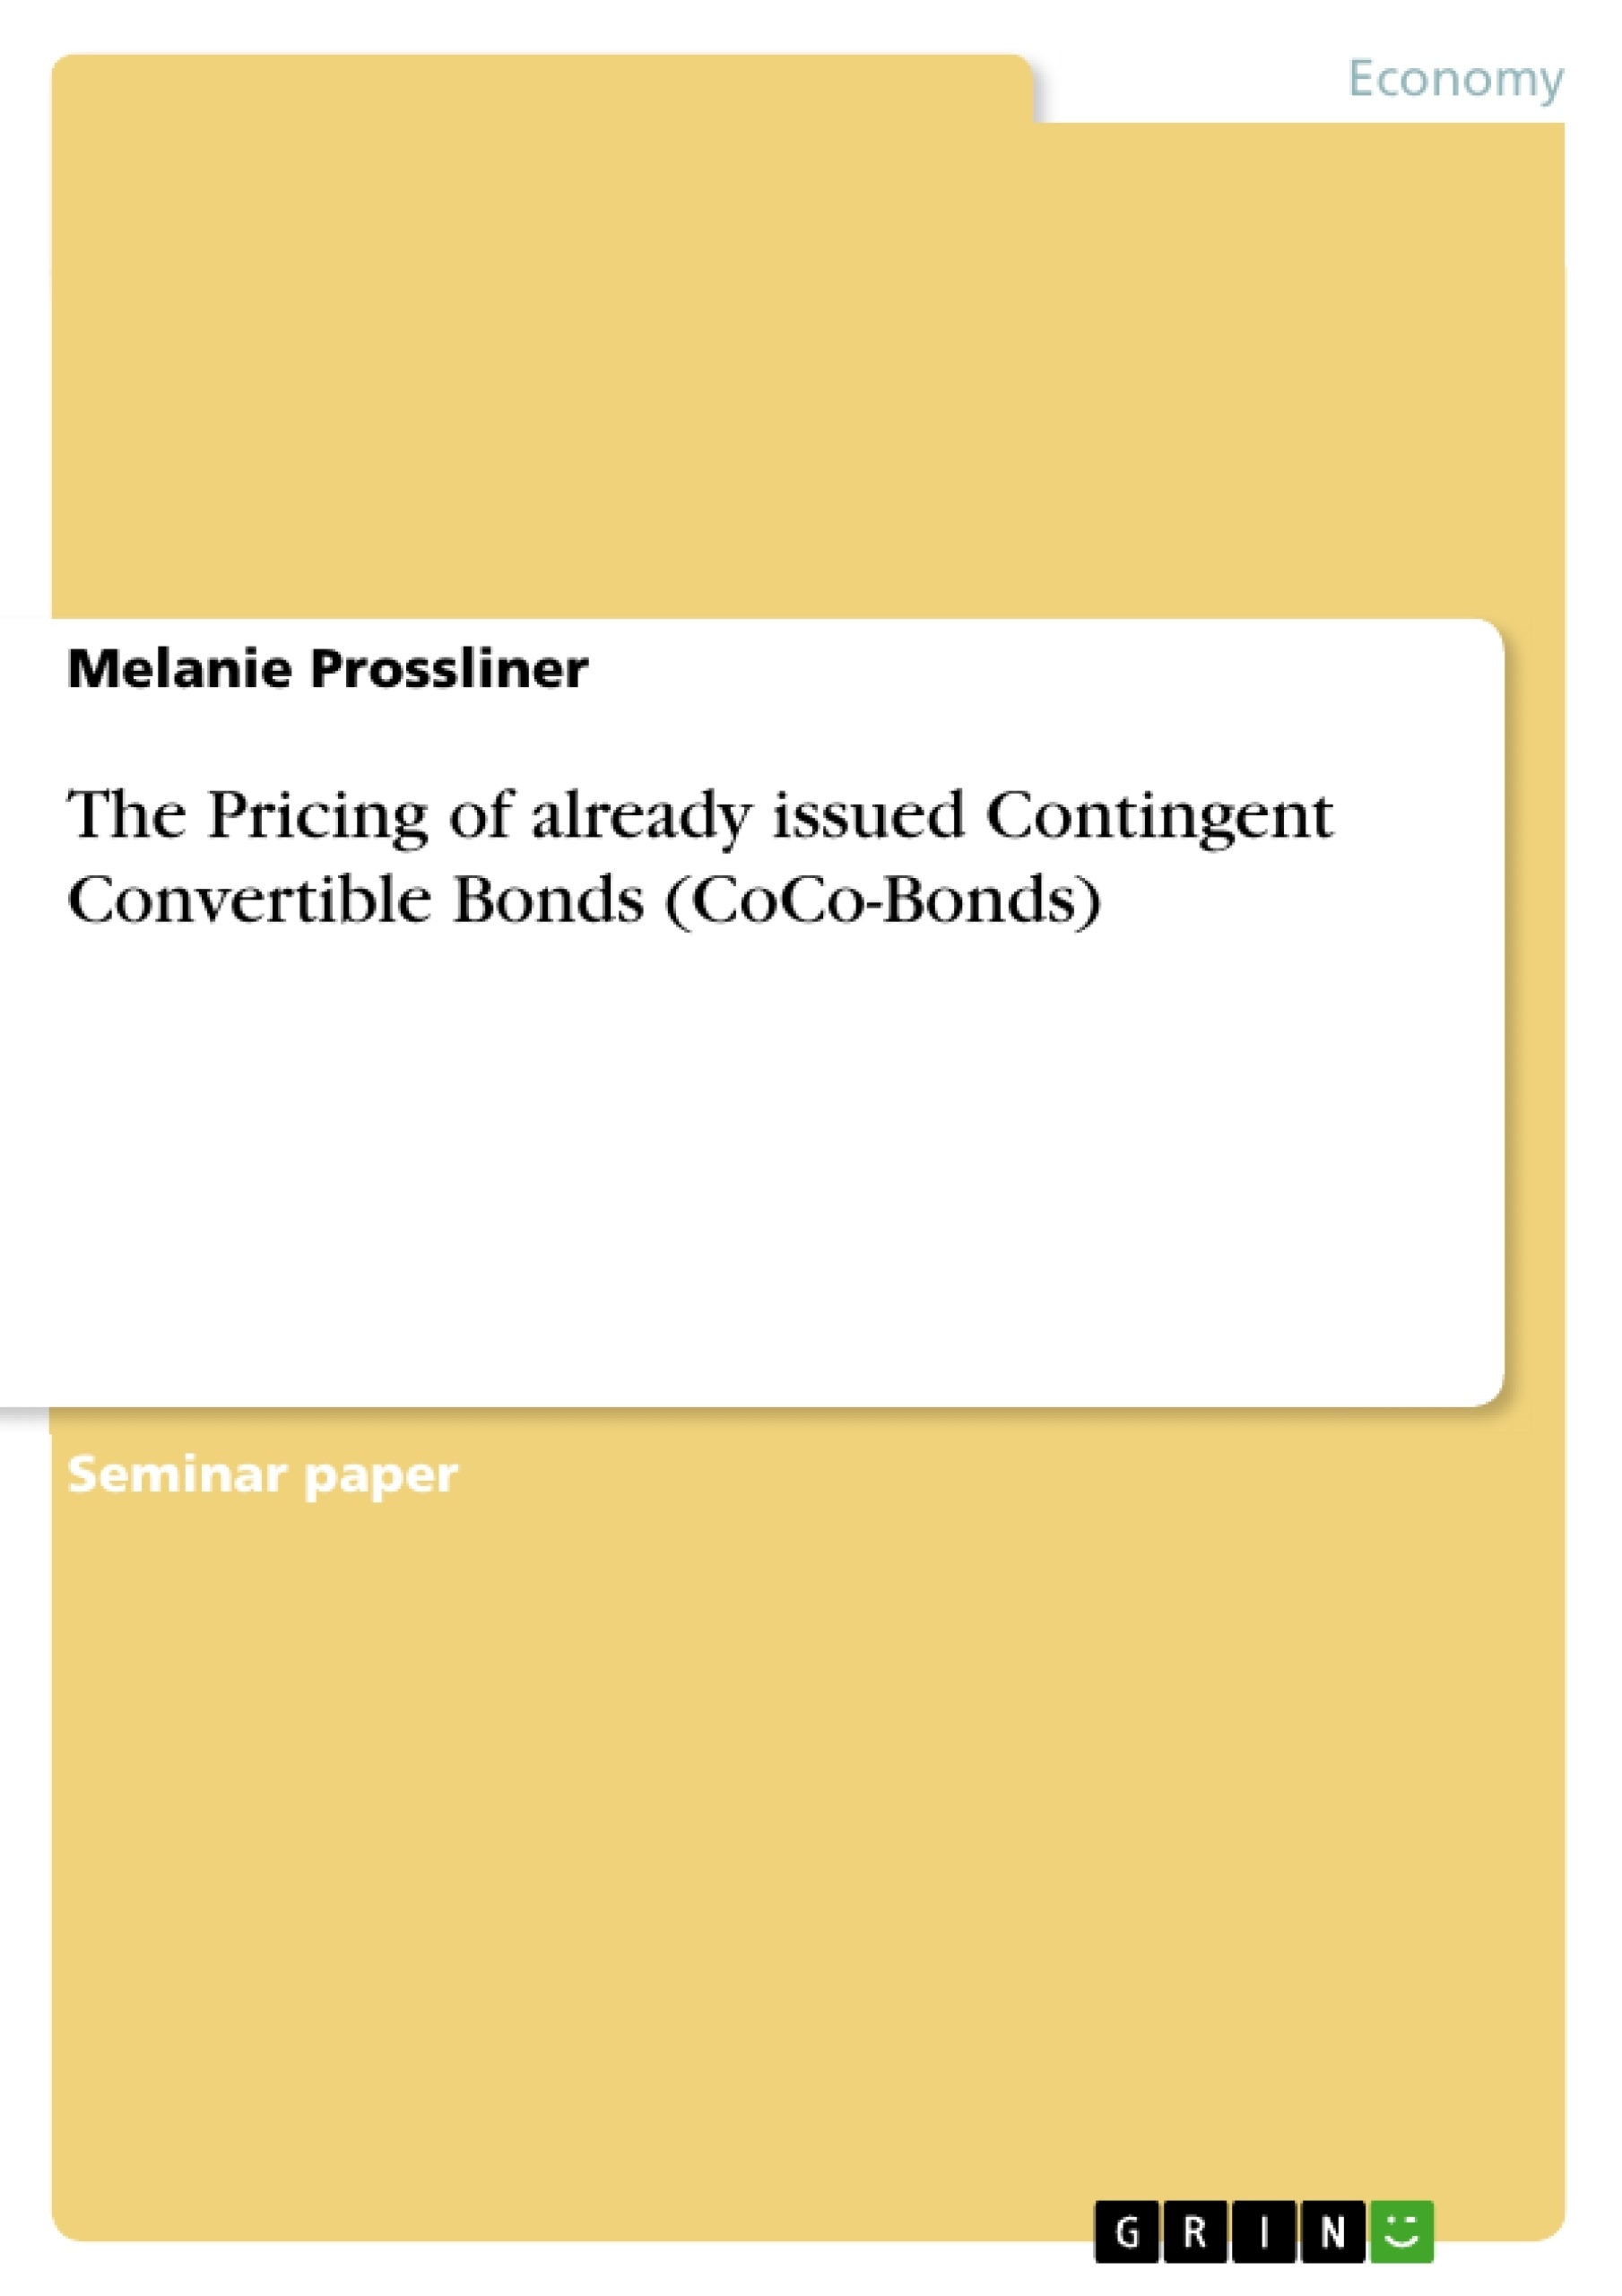 Título: The Pricing of already issued Contingent Convertible Bonds (CoCo-Bonds)